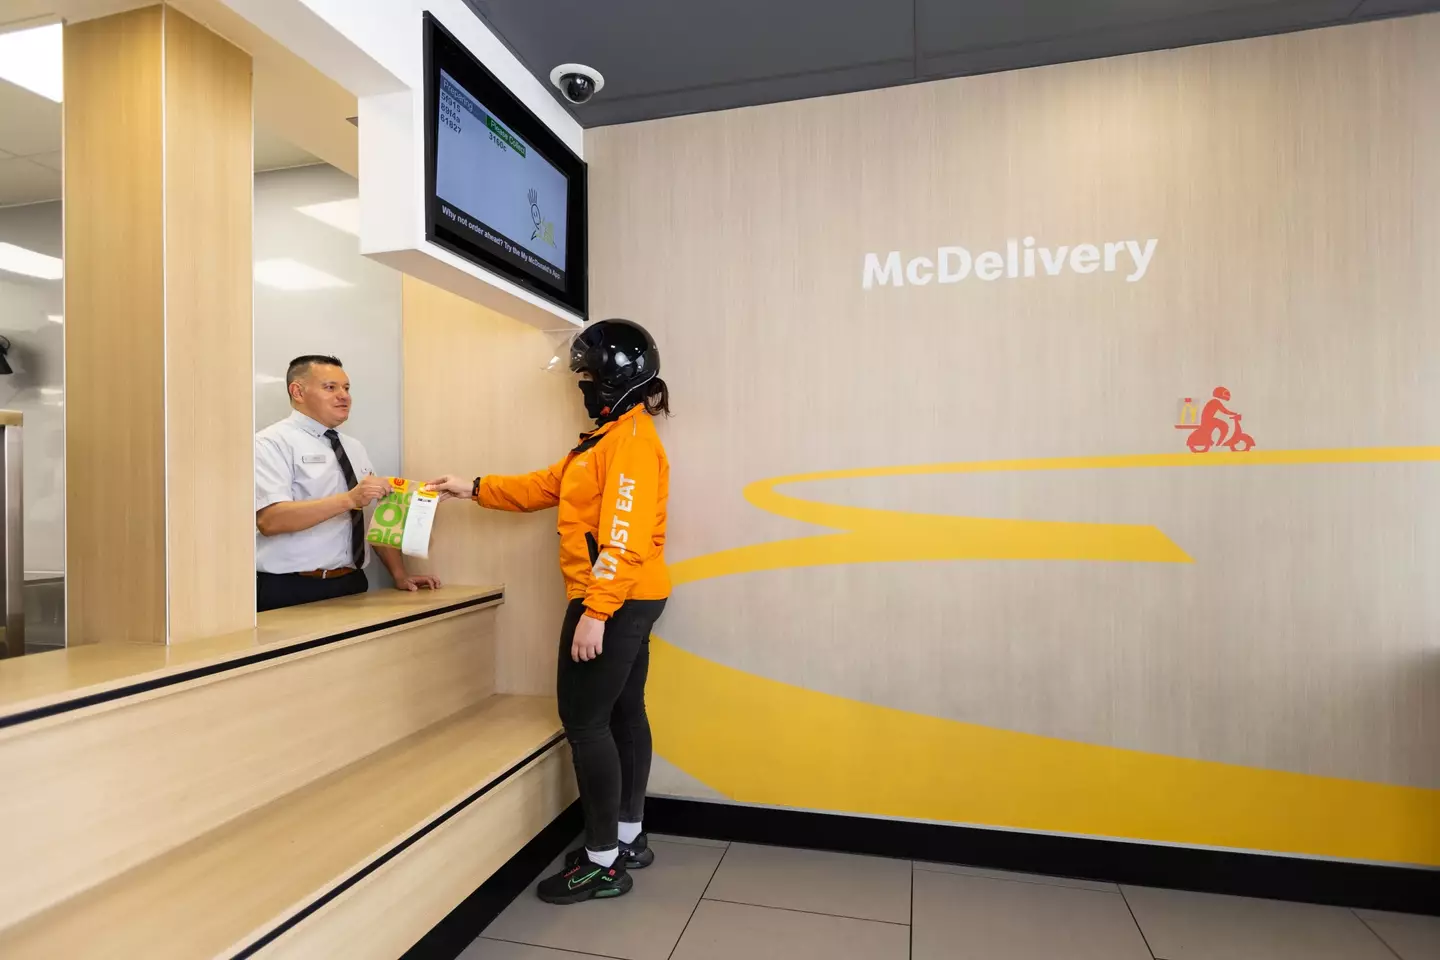 McDonald's is set for a redesign.